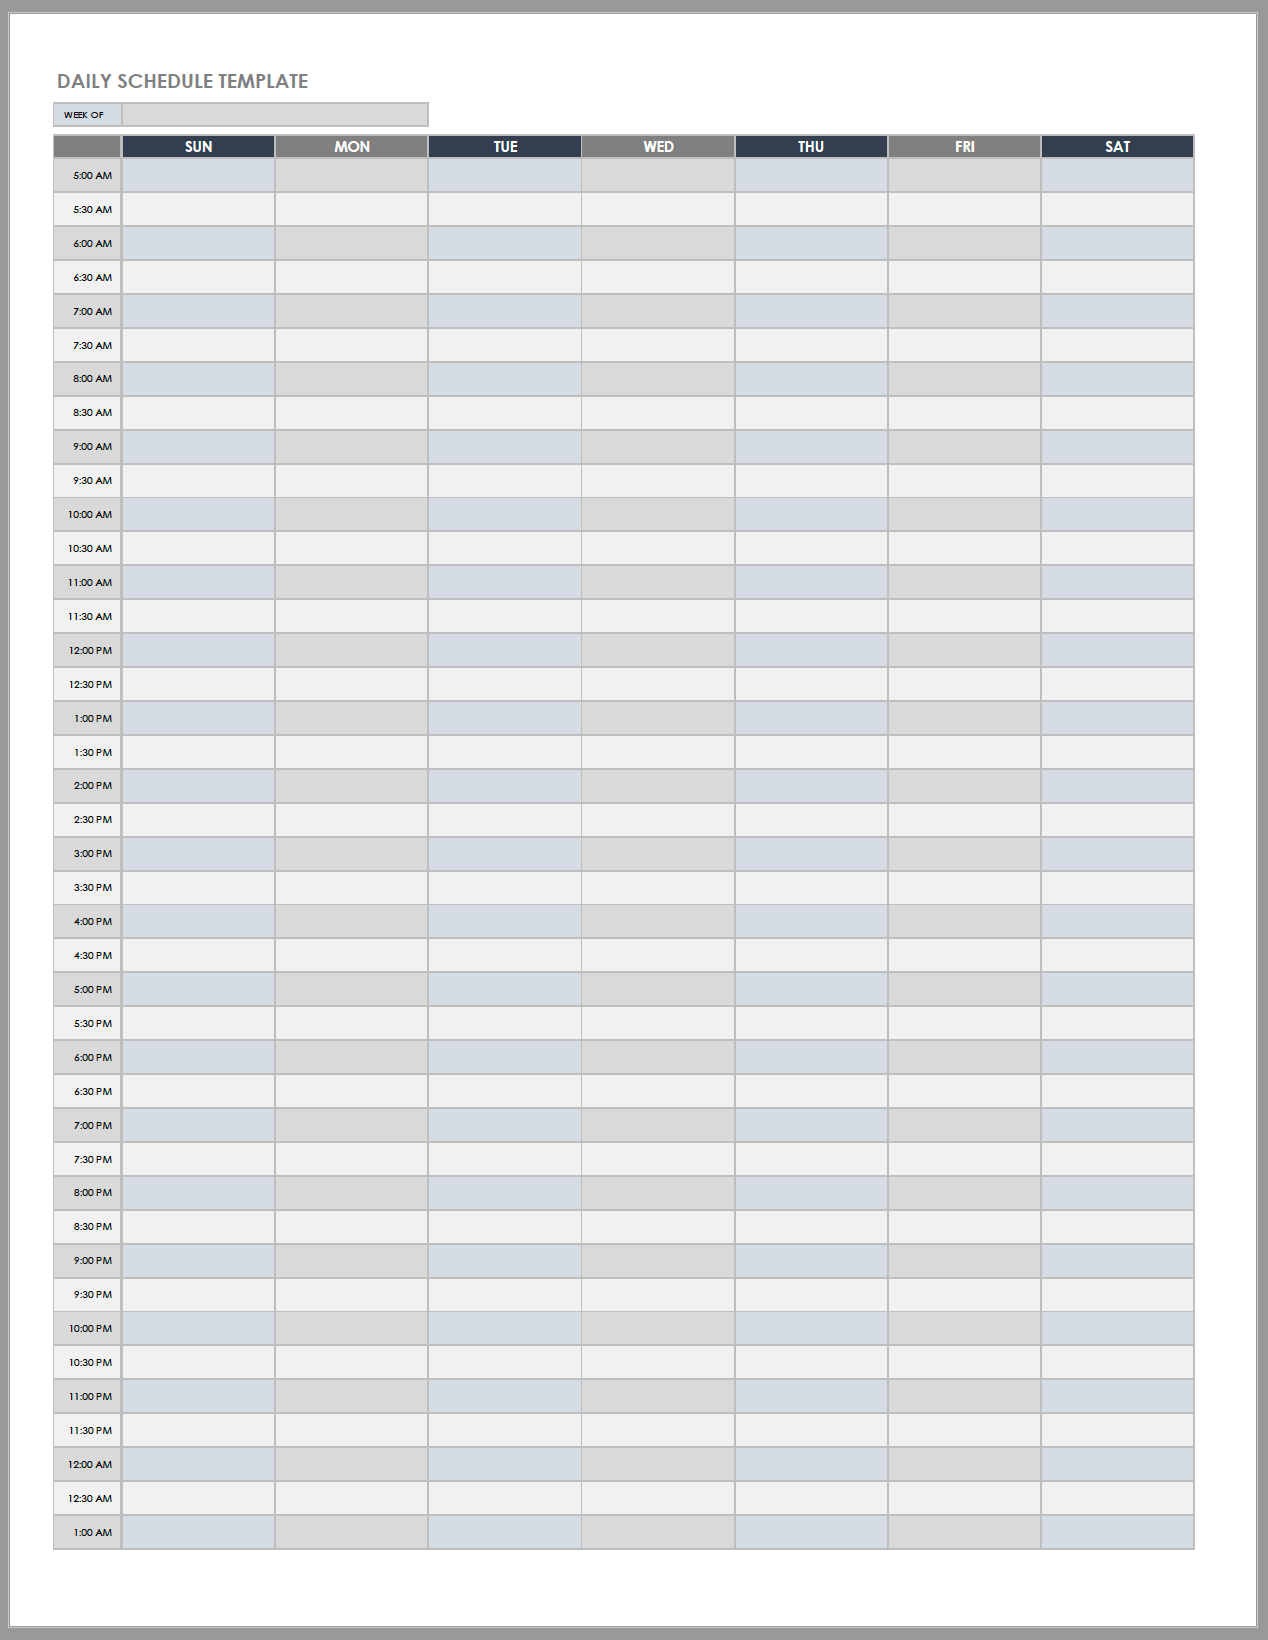 excel free daily work schedule template